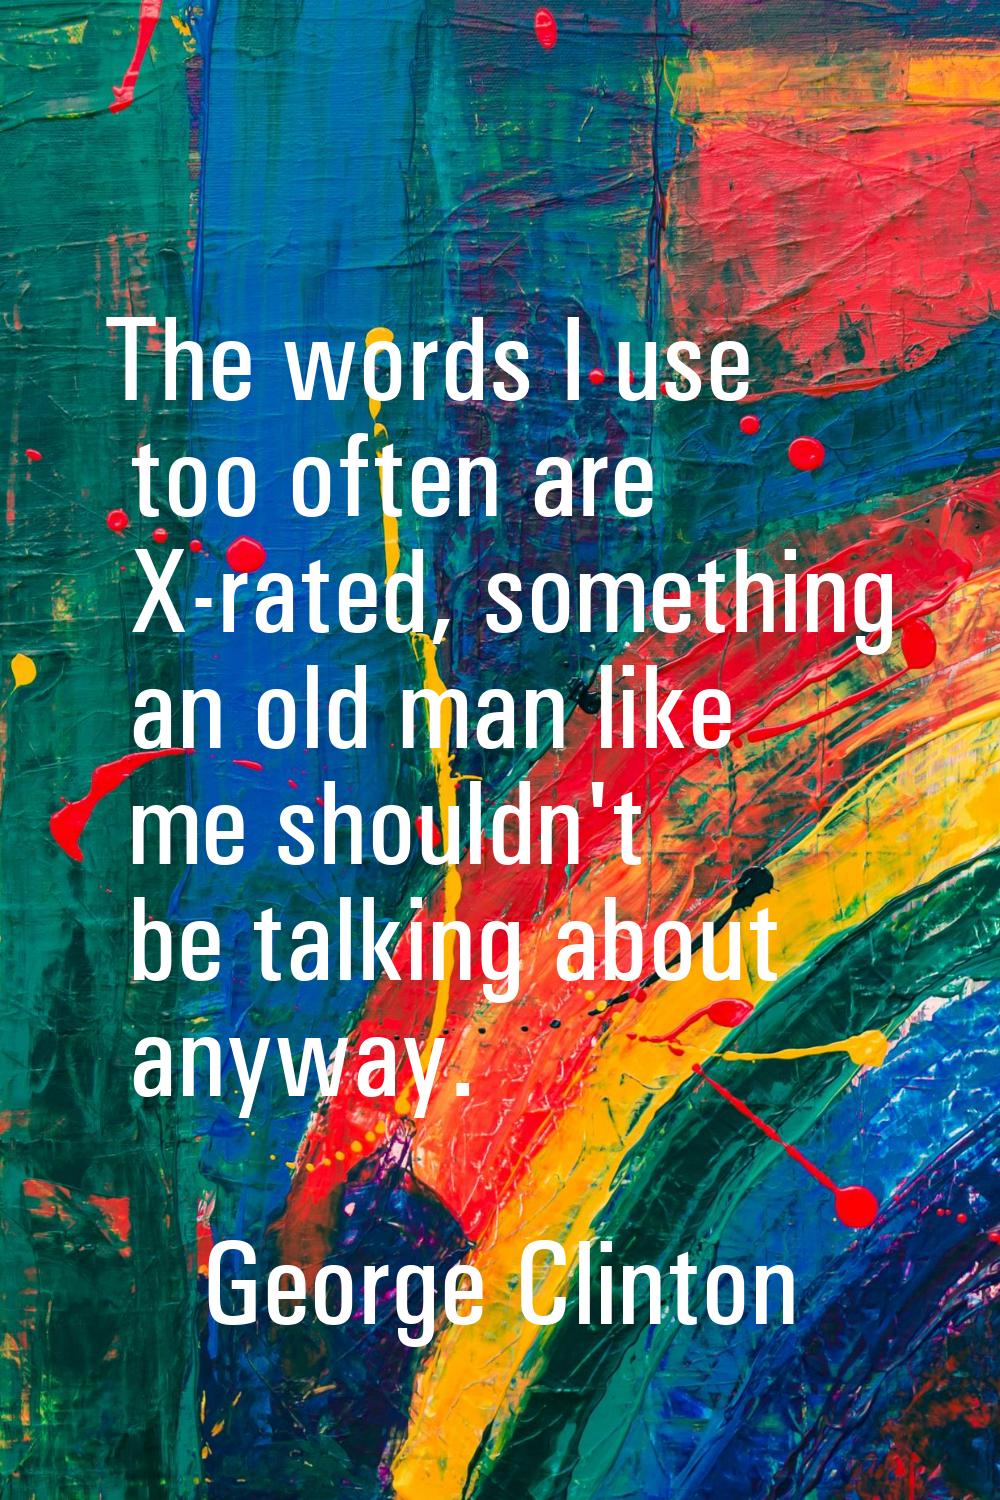 The words I use too often are X-rated, something an old man like me shouldn't be talking about anyw